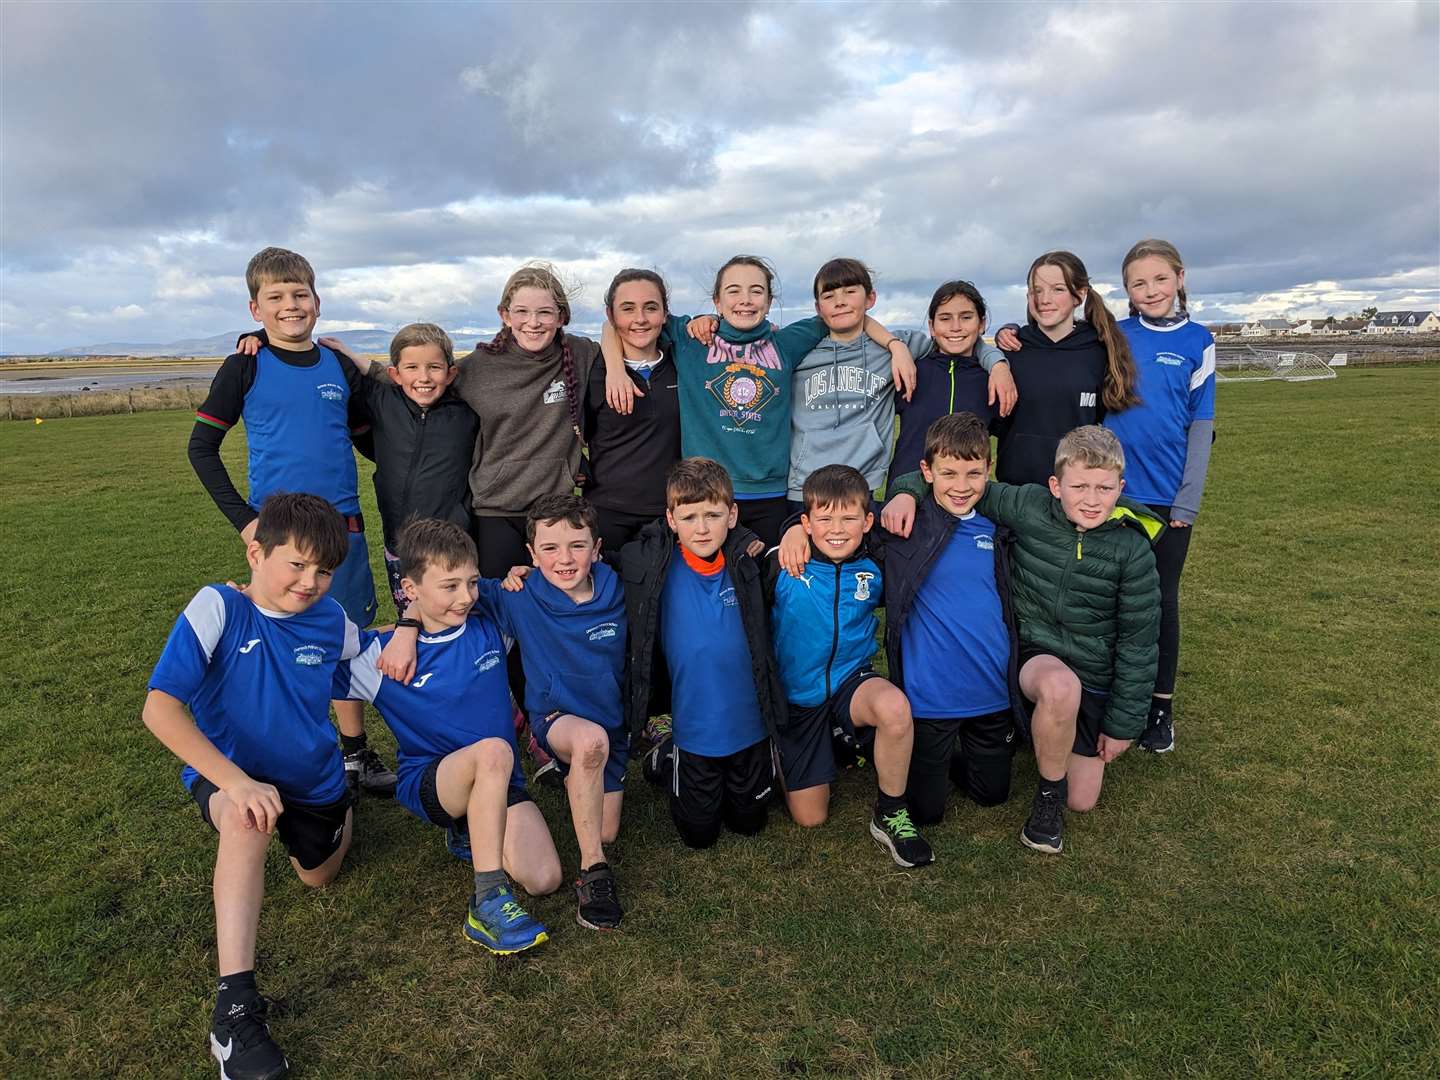 Cross country runners from Dornoch Primary School.